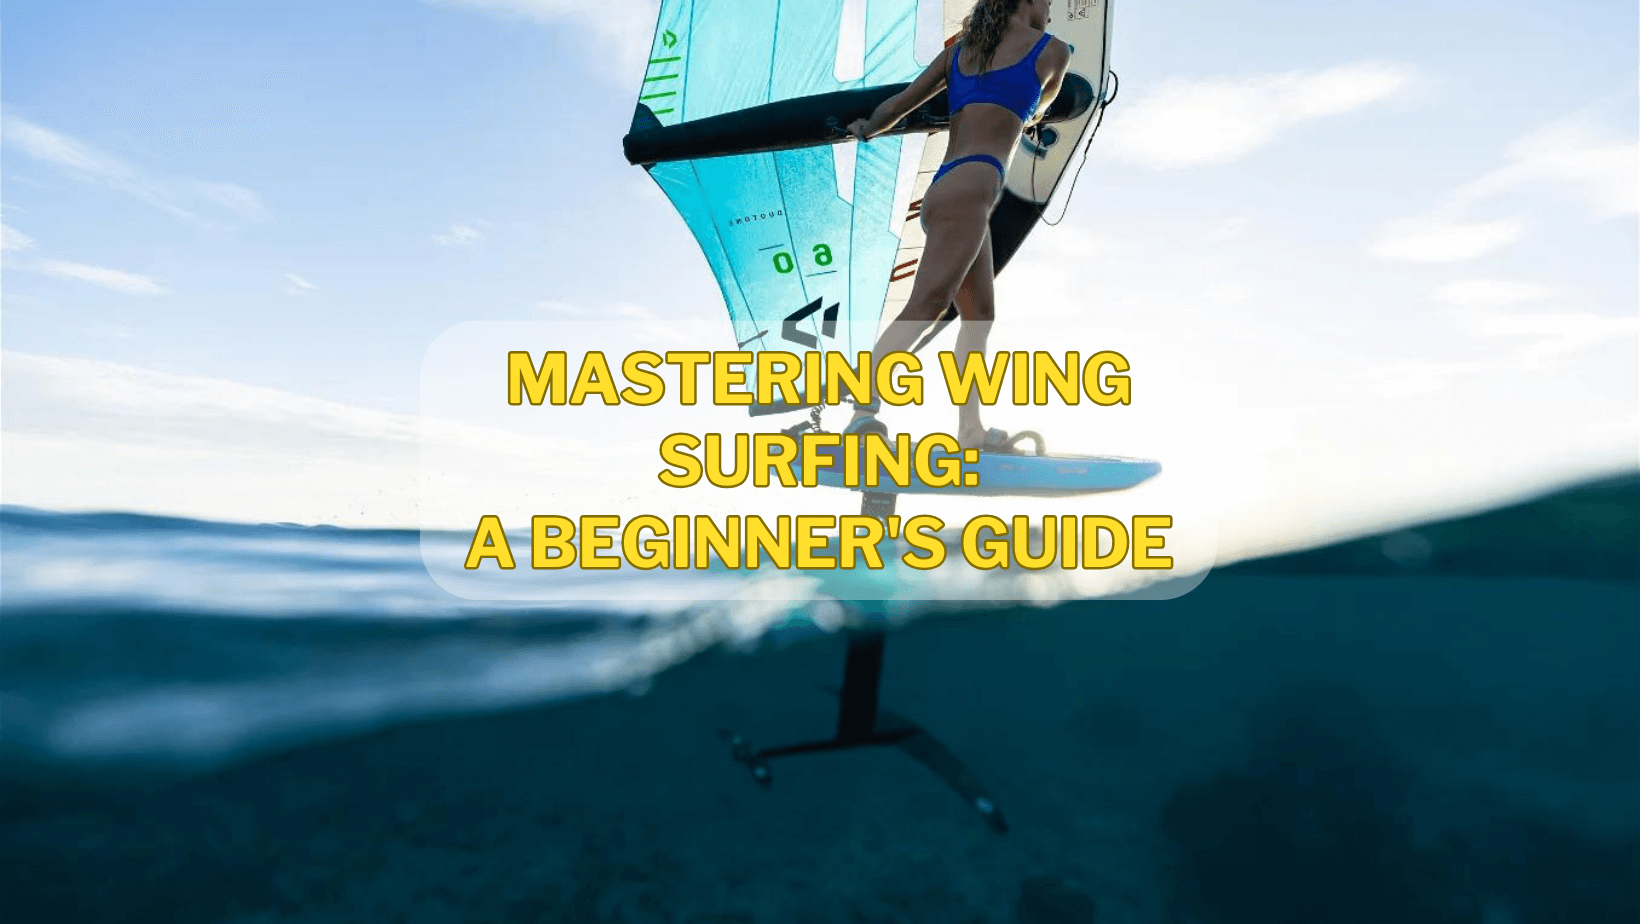 Mastering Wing Surfing: A Beginner's Guide